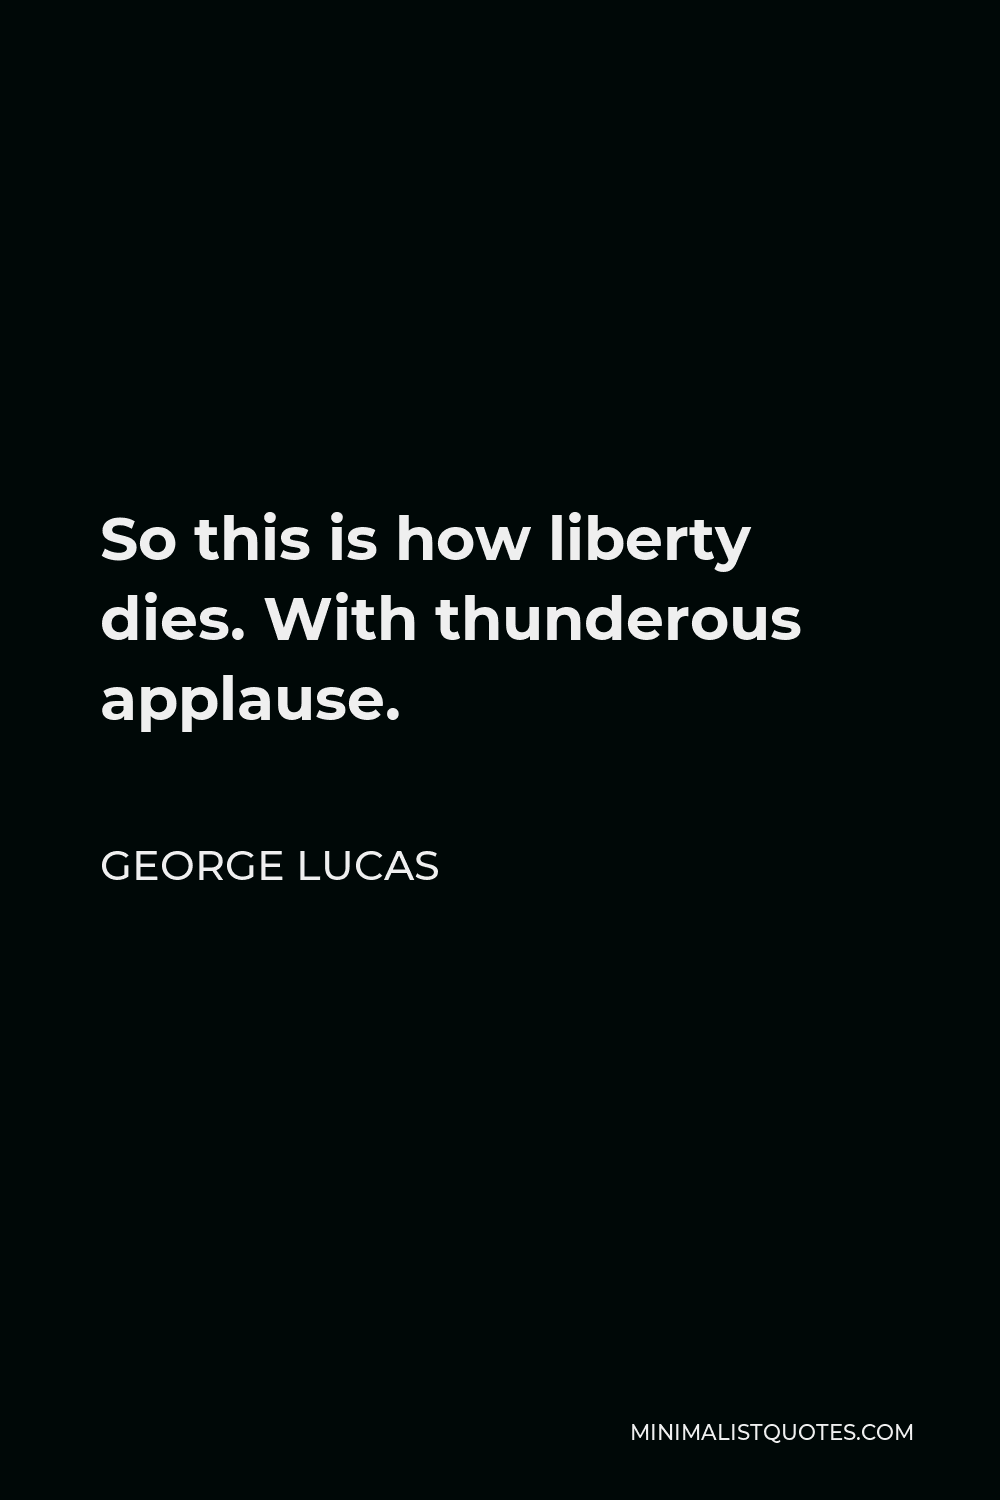 George Lucas Quote - So this is how liberty dies. With thunderous applause.